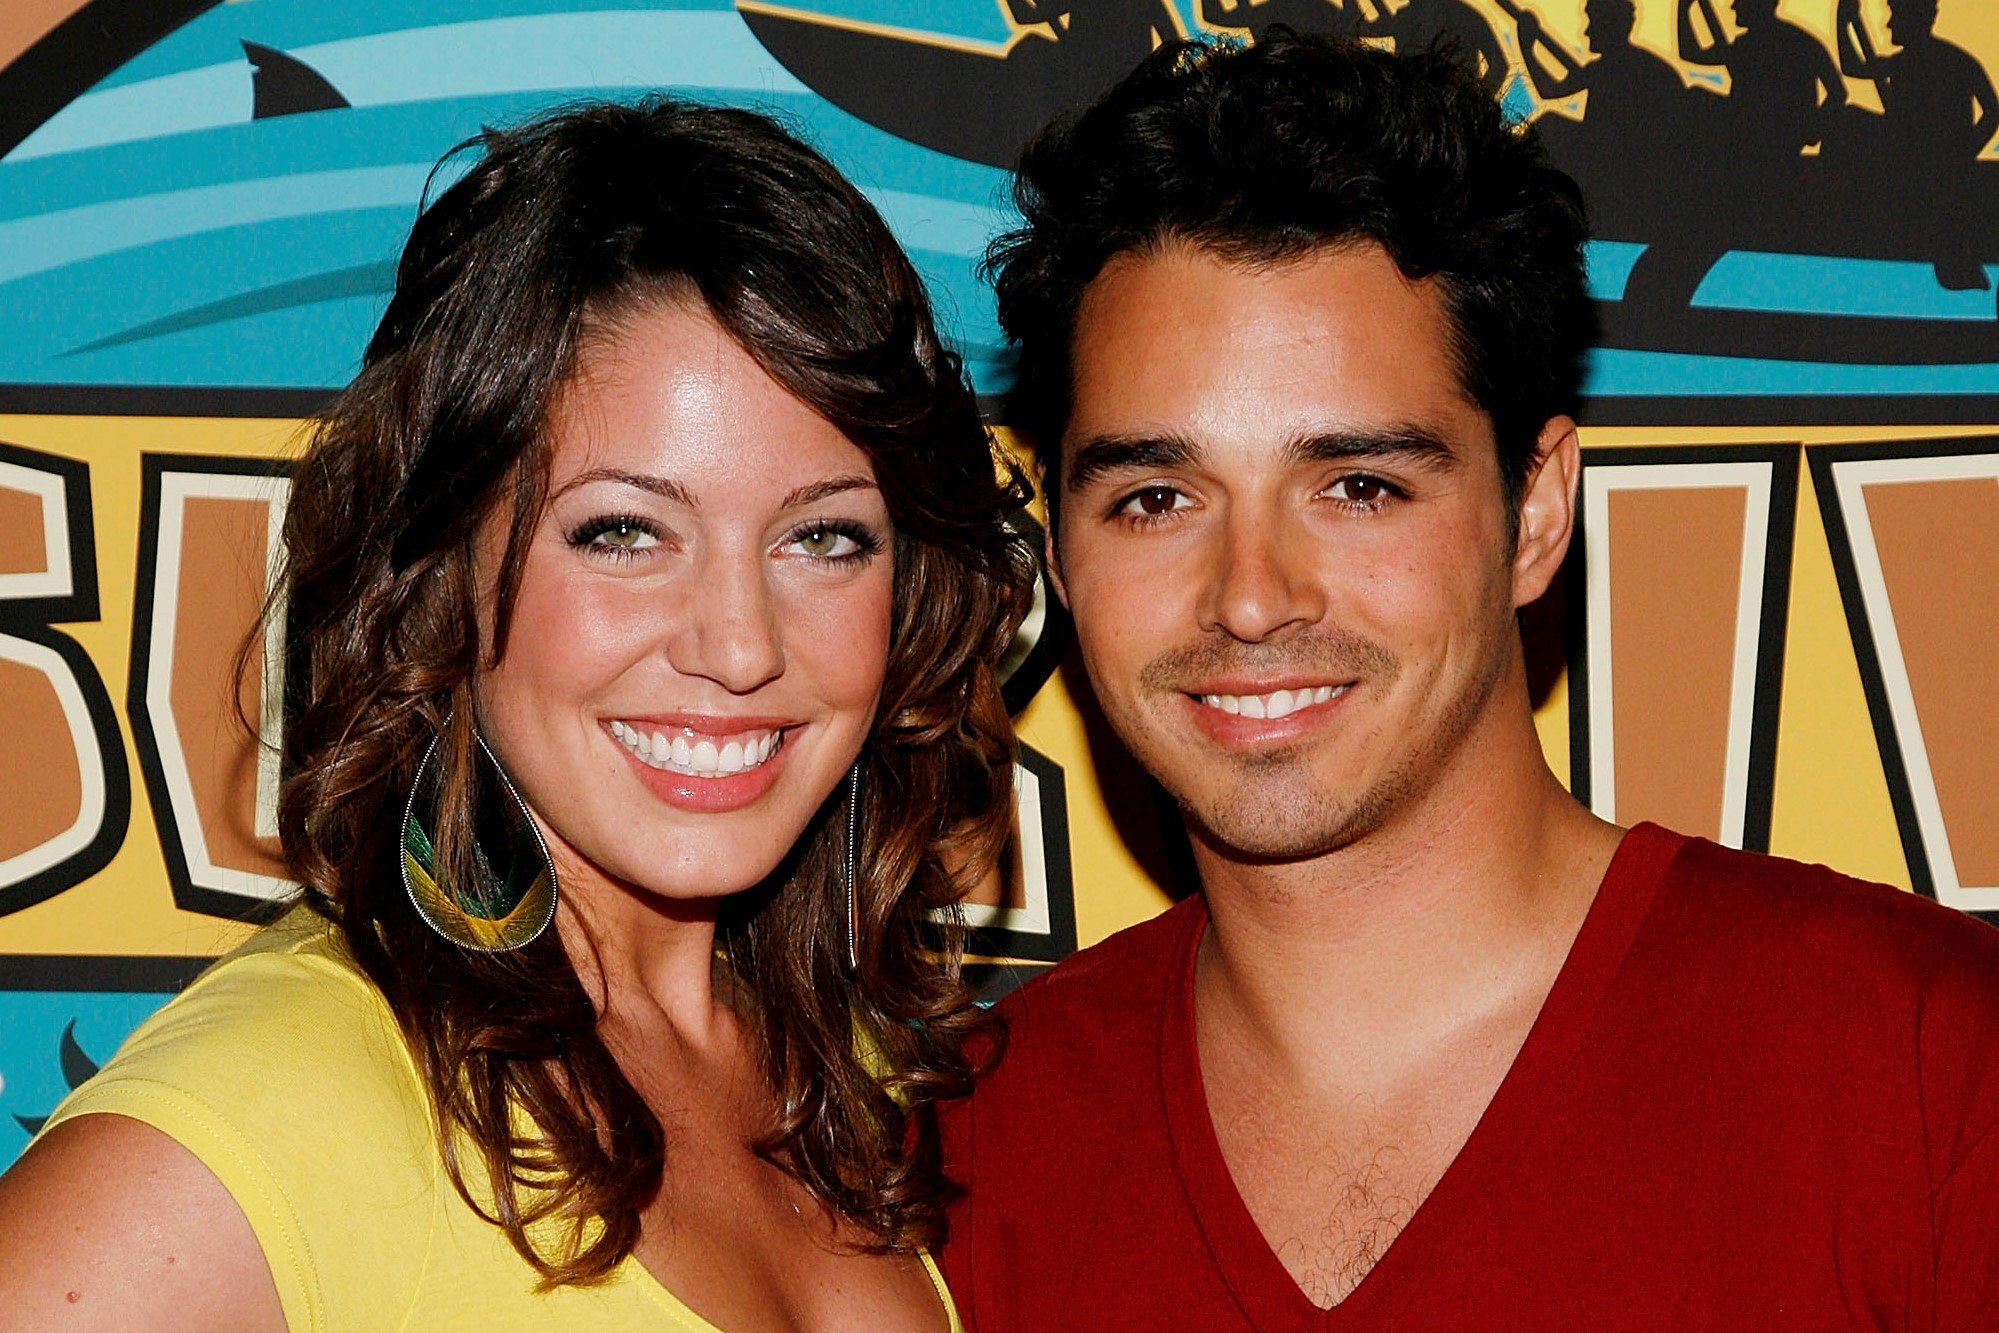 'Survivor' Season 16 castaways Amanda Kimmel and Ozzy Lusth pose for a picture together. Amanda wears a yellow shirt and big yellow and green earrings. Ozzy wears a red v-neck shirt.